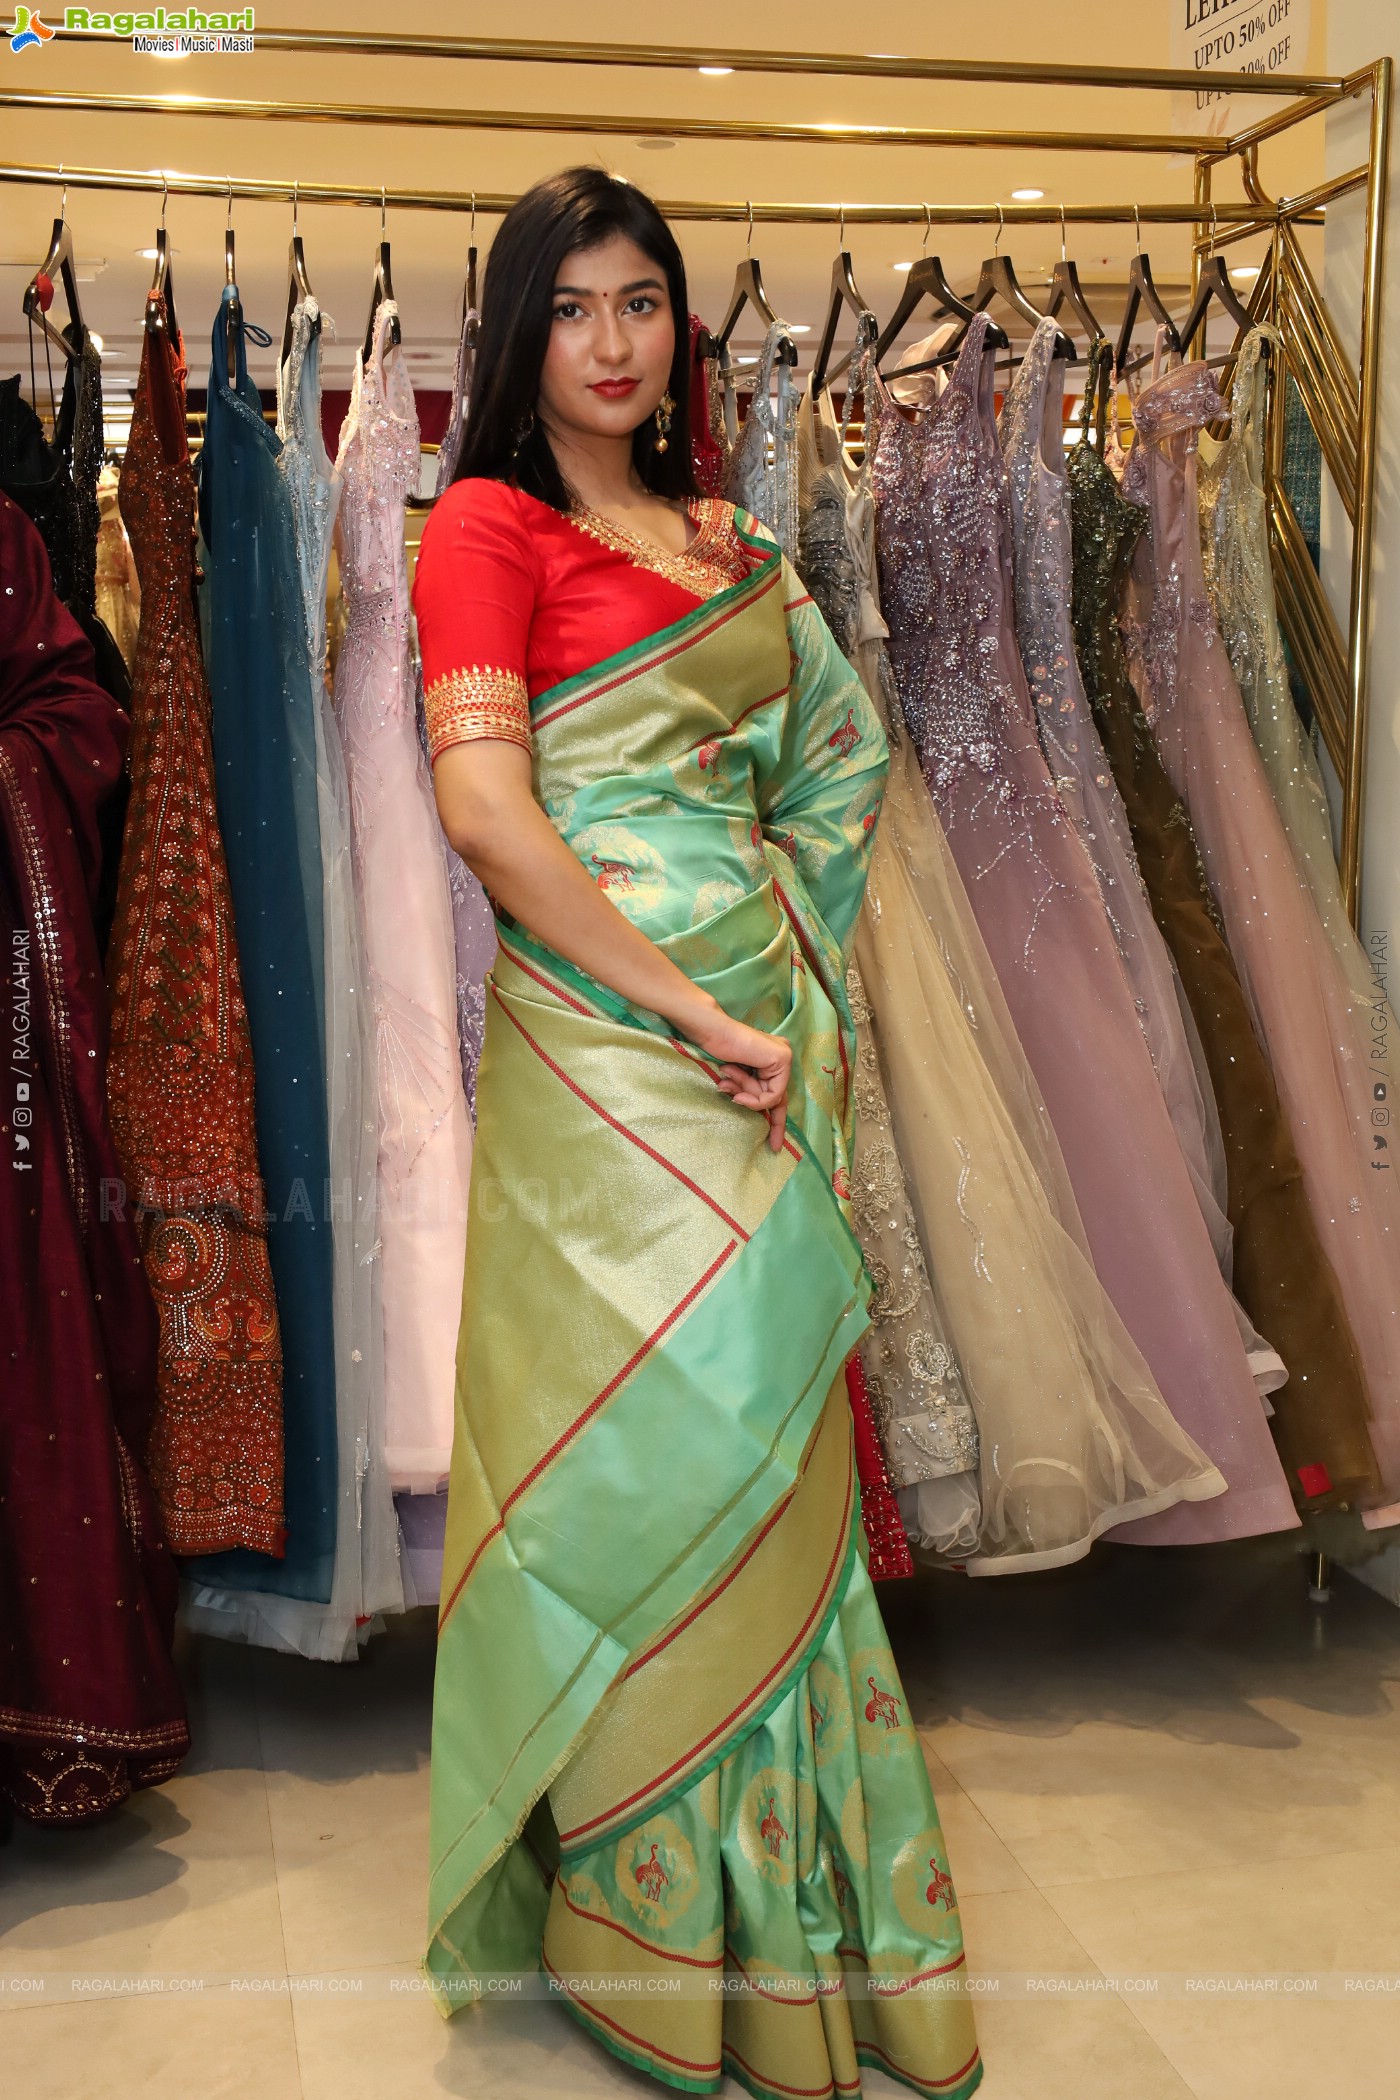 Singhania's Annual Sale at Jubilee Hills, Hyderabad